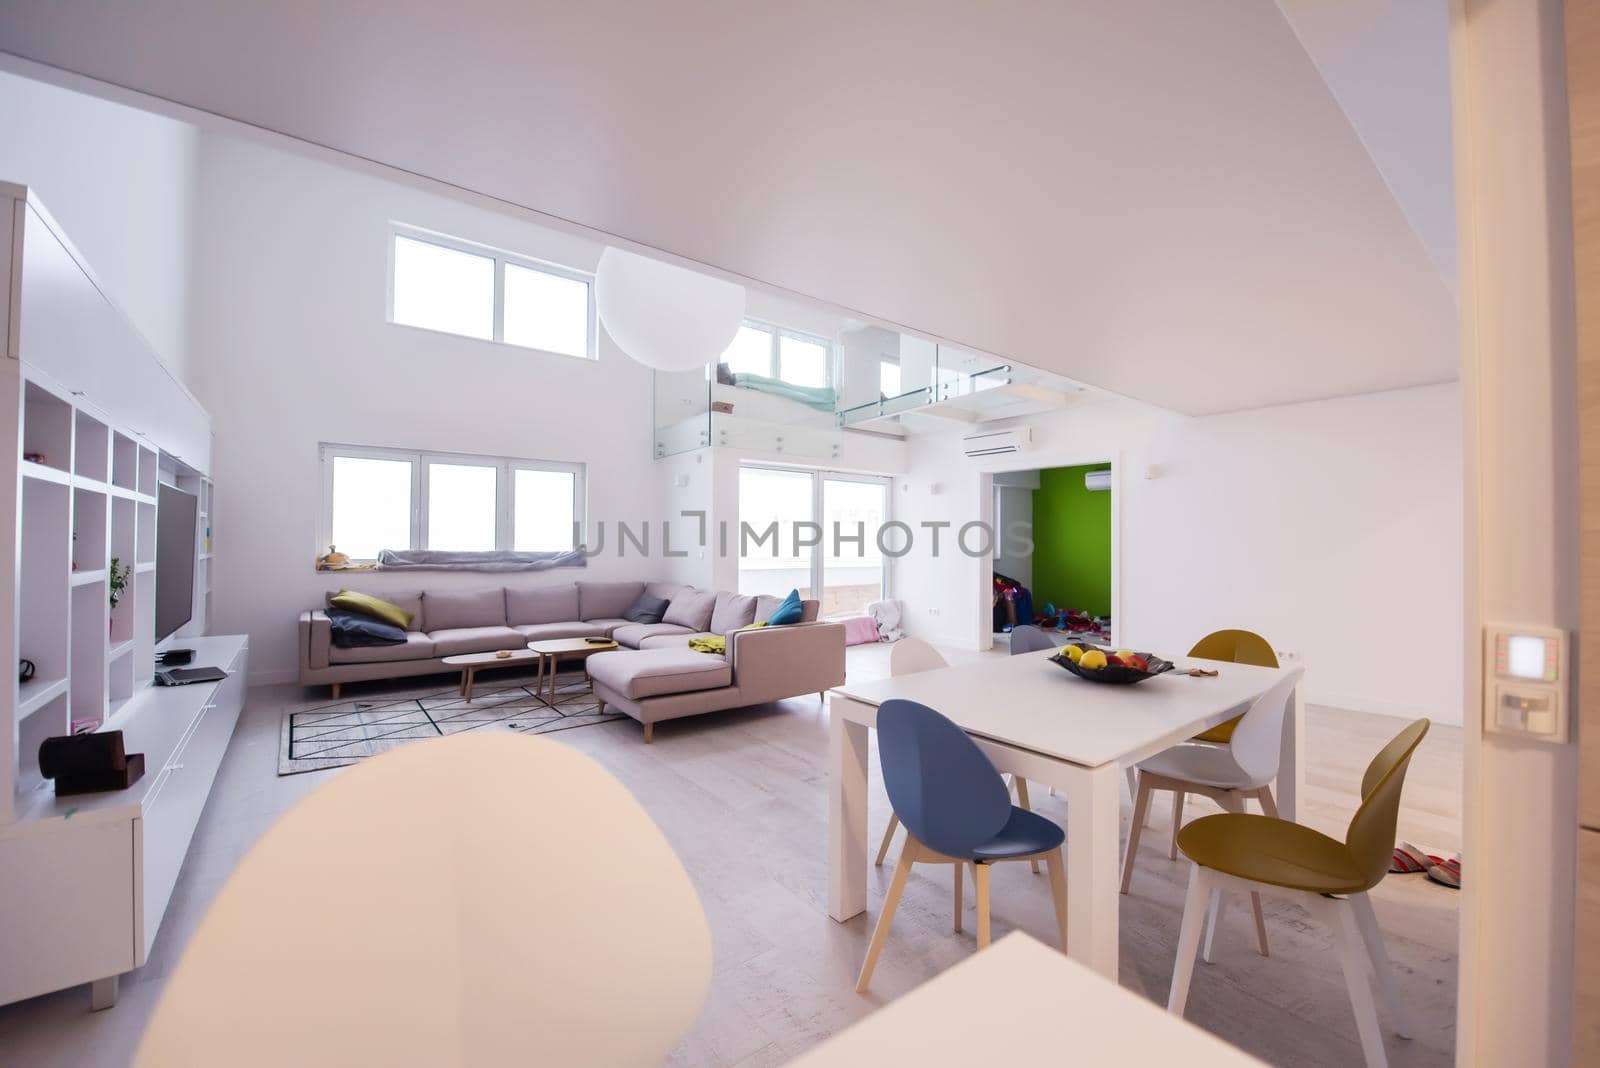 interior of a luxury stylish modern open space design two level apartment with white walls